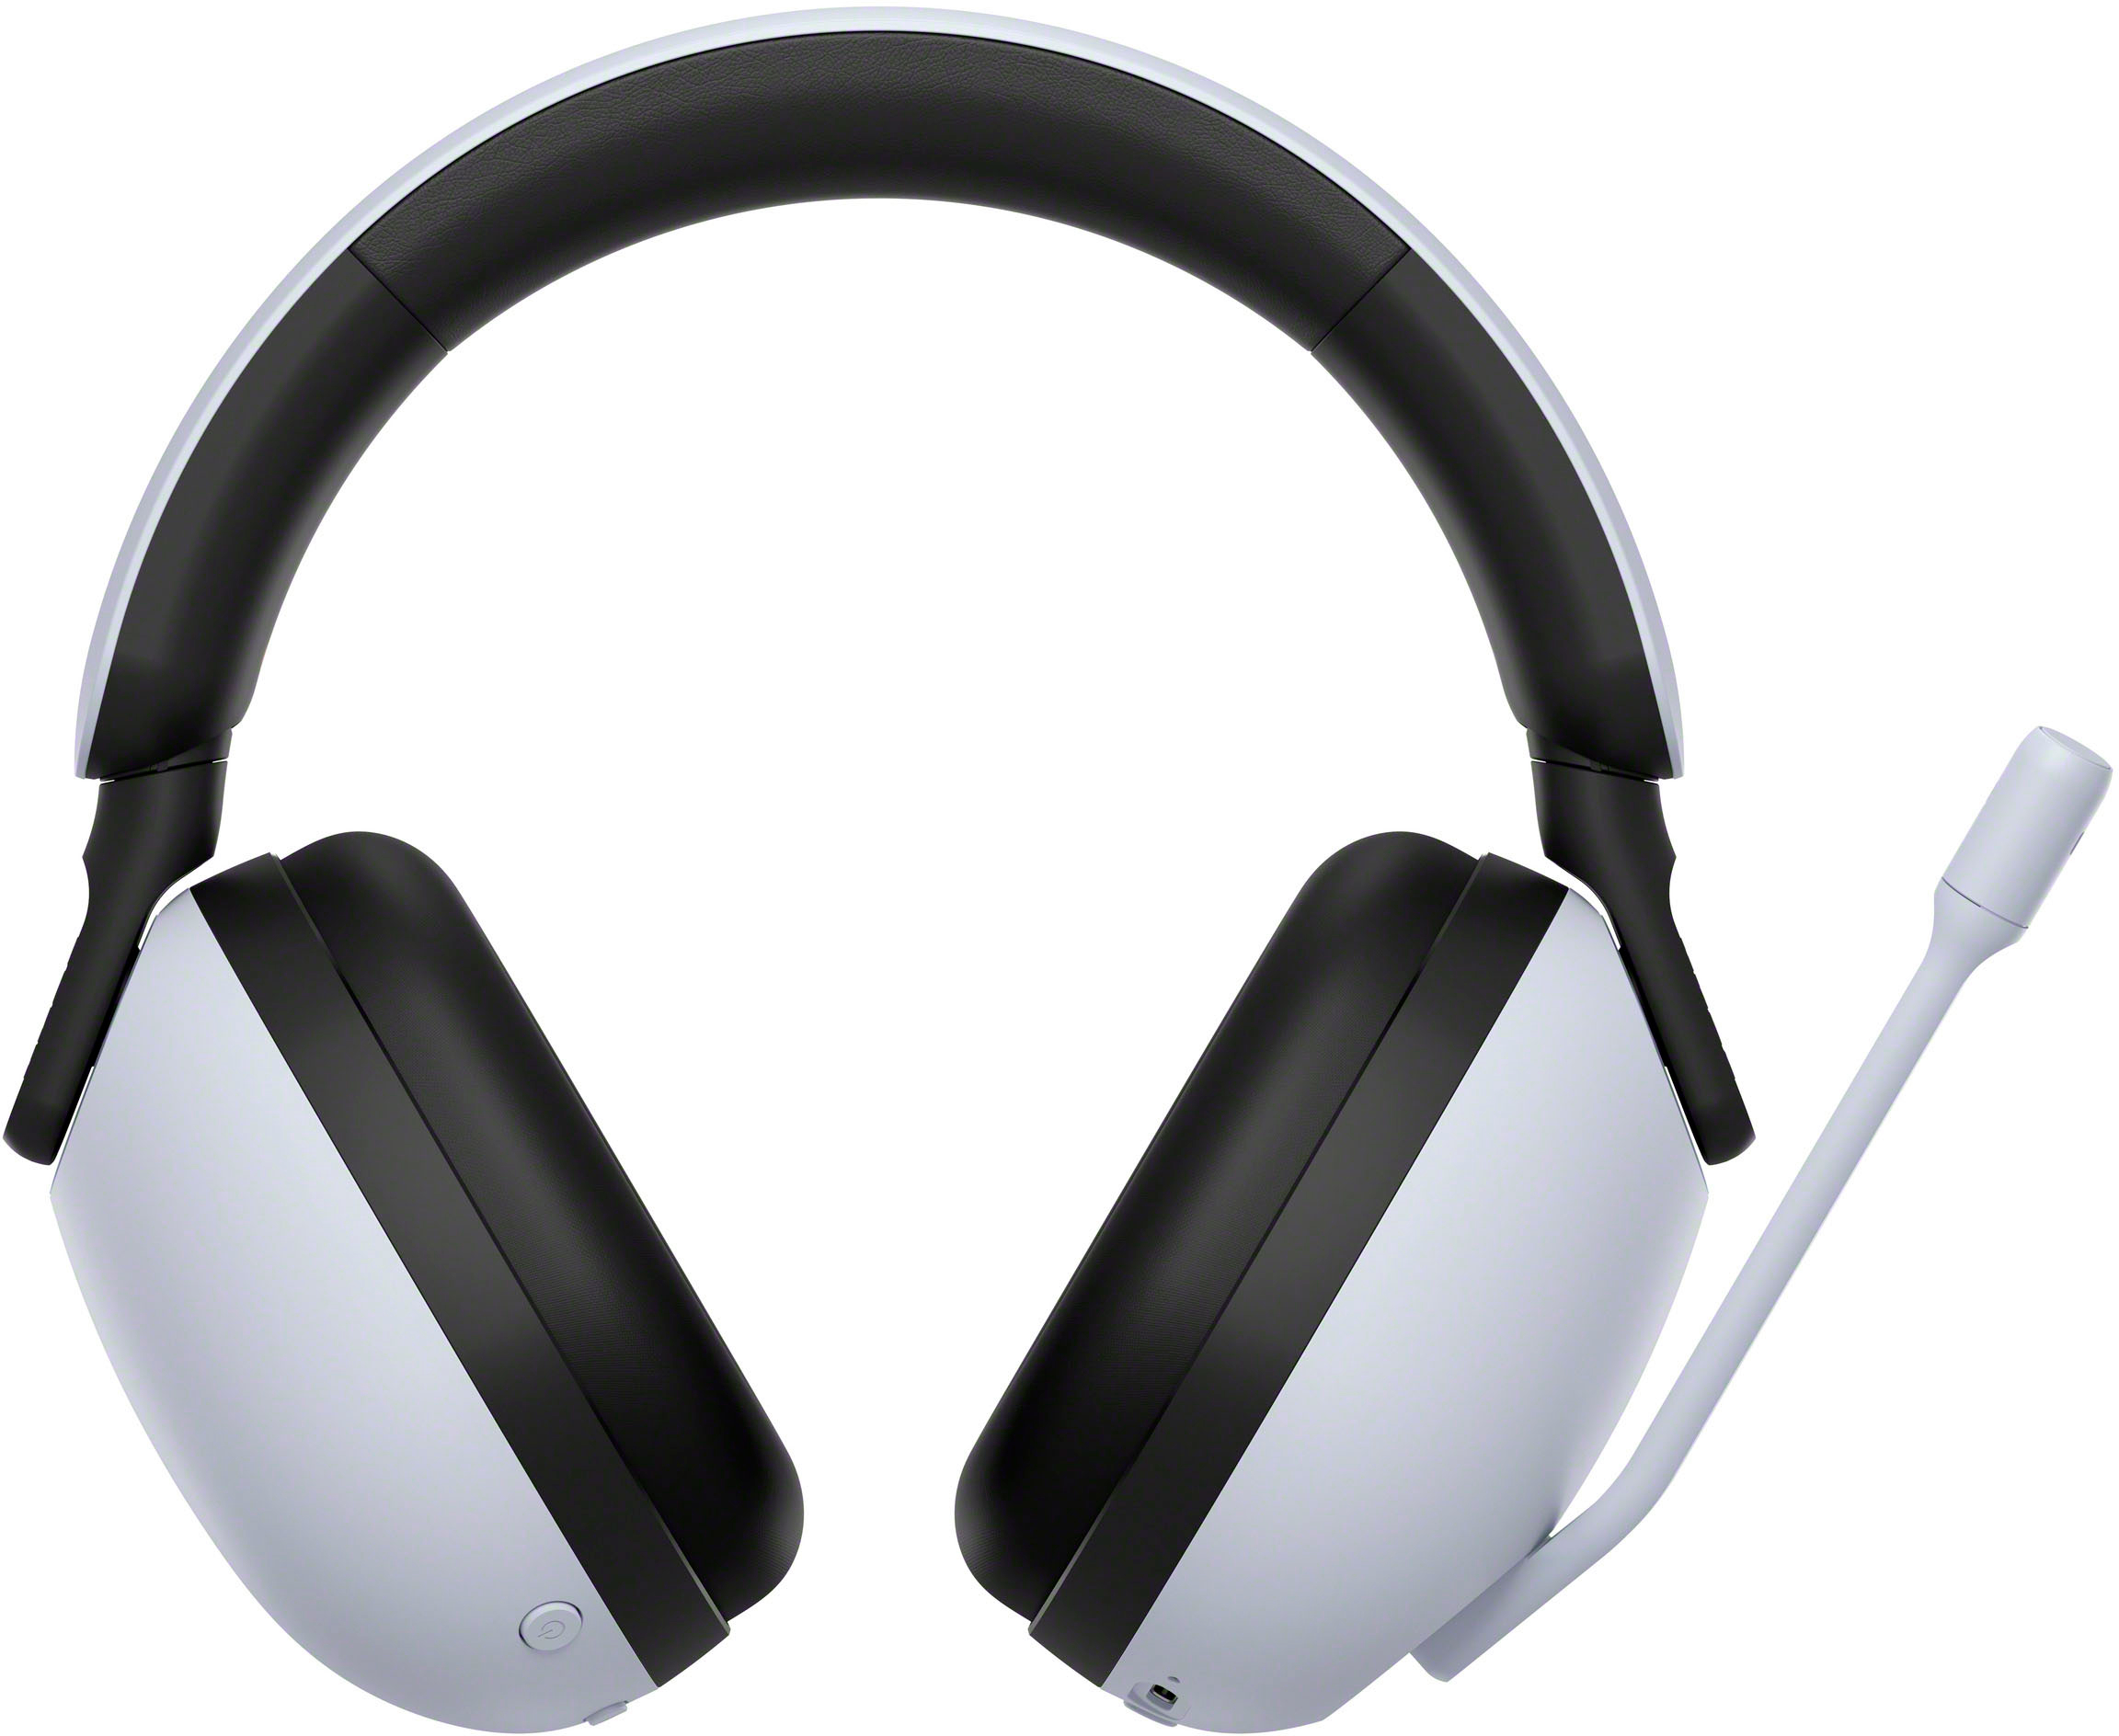 Customer Reviews: Sony INZONE H9 Wireless Noise Canceling Gaming